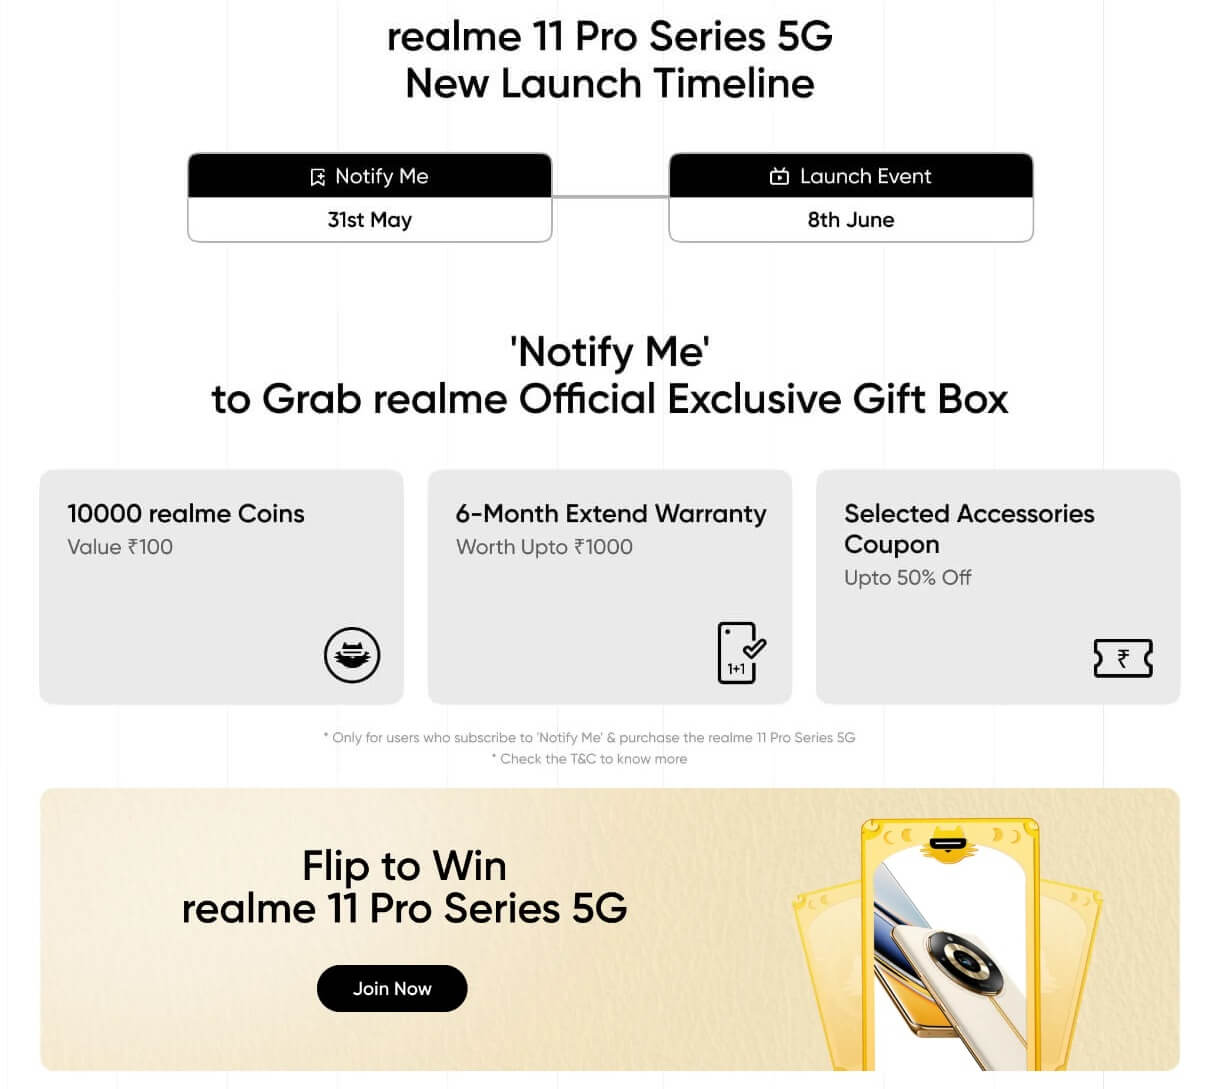 realme 11 Pro series launch time offers cn